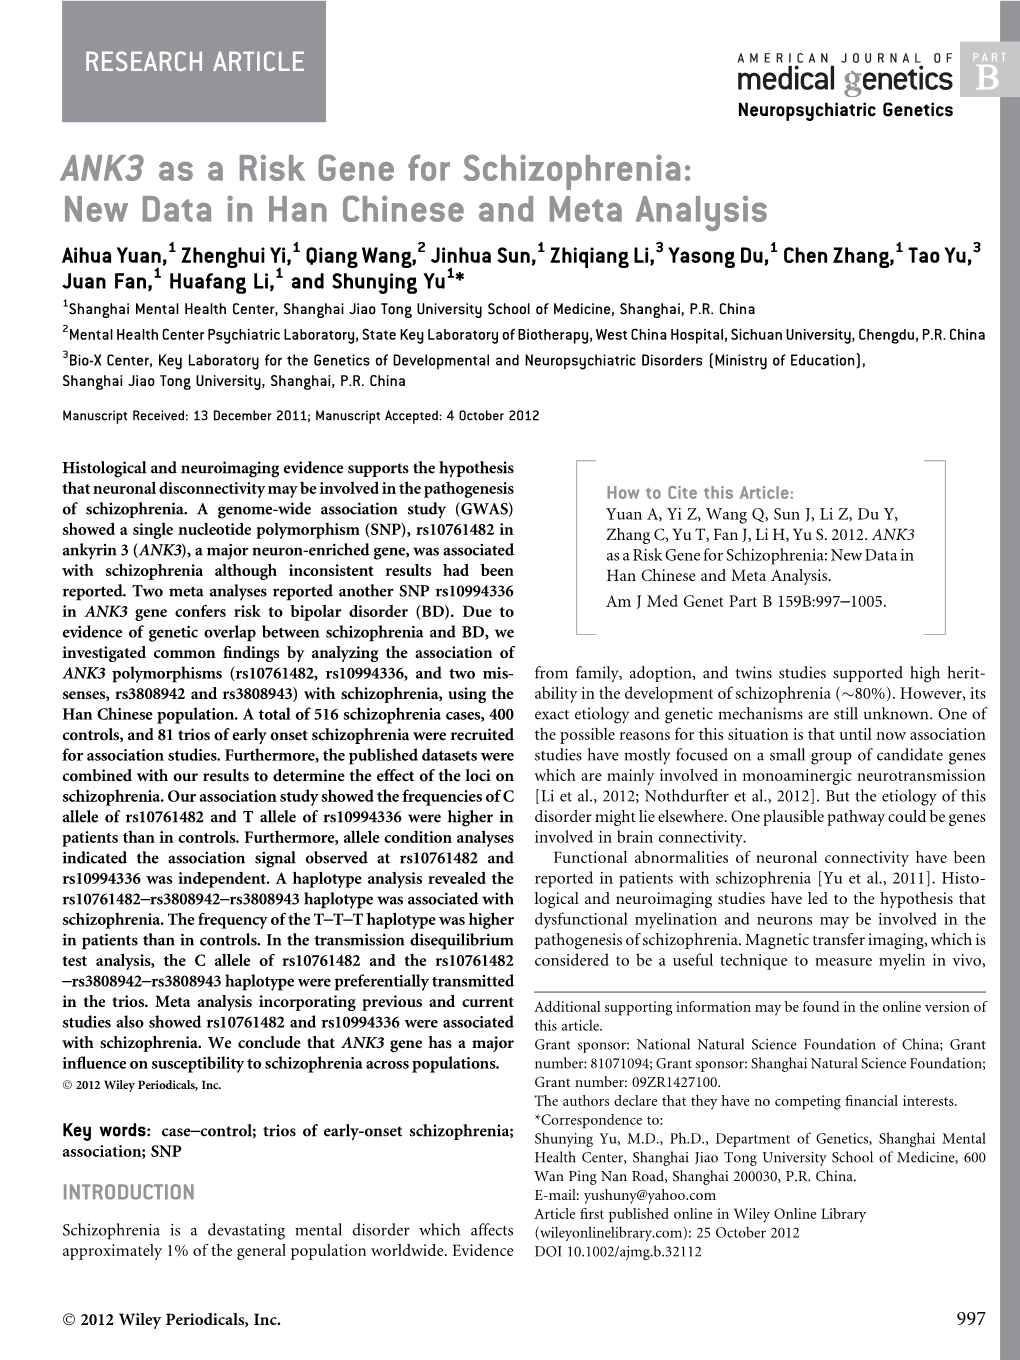 ANK3 As a Risk Gene for Schizophrenia: New Data in Han Chinese And